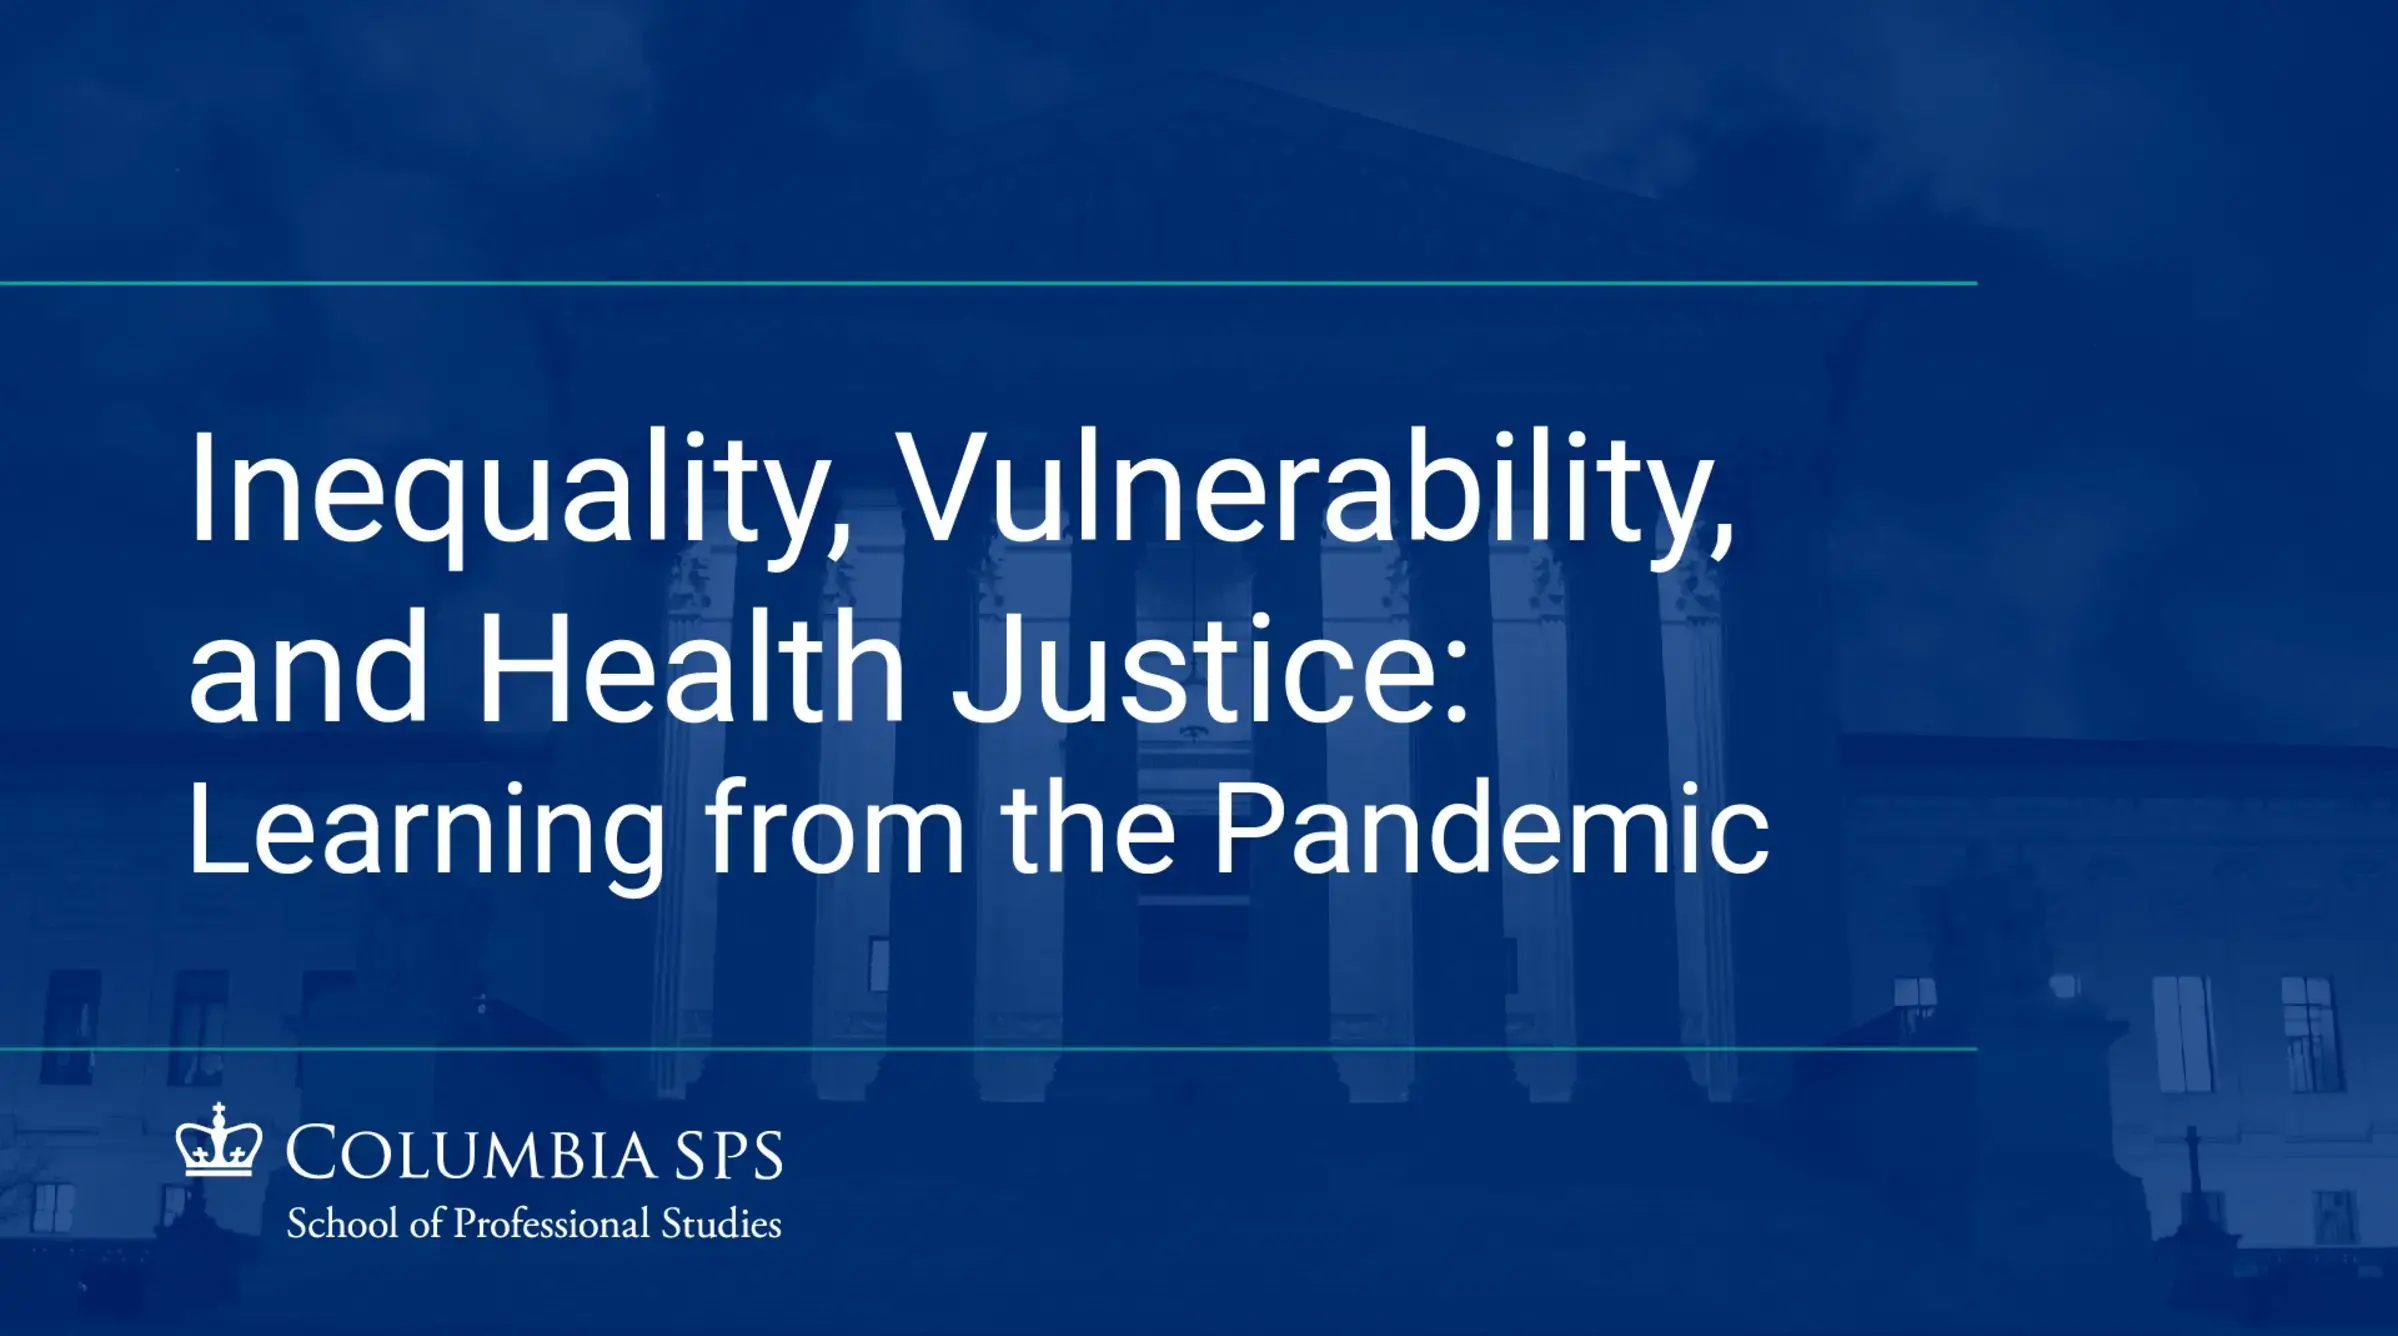 A cover image for a recording of the Bioethics webinar on  "Video Cover Image - Inequality, Vulnerability, and Health Justice: Learning from the Pandemic."